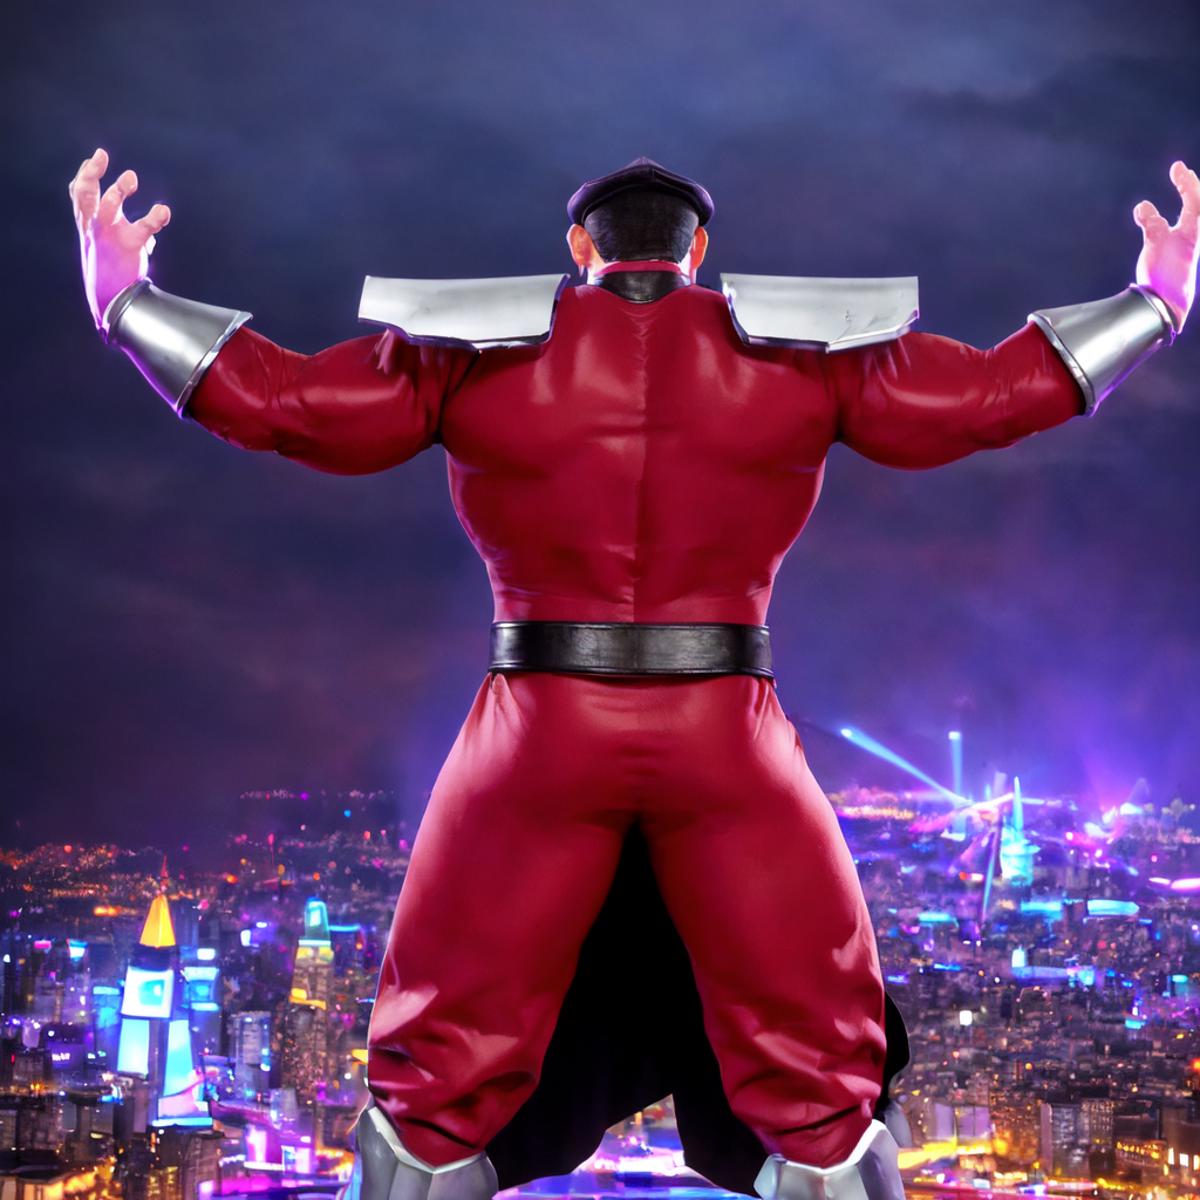 M. Bison from Street Fighter image by Bloodysunkist